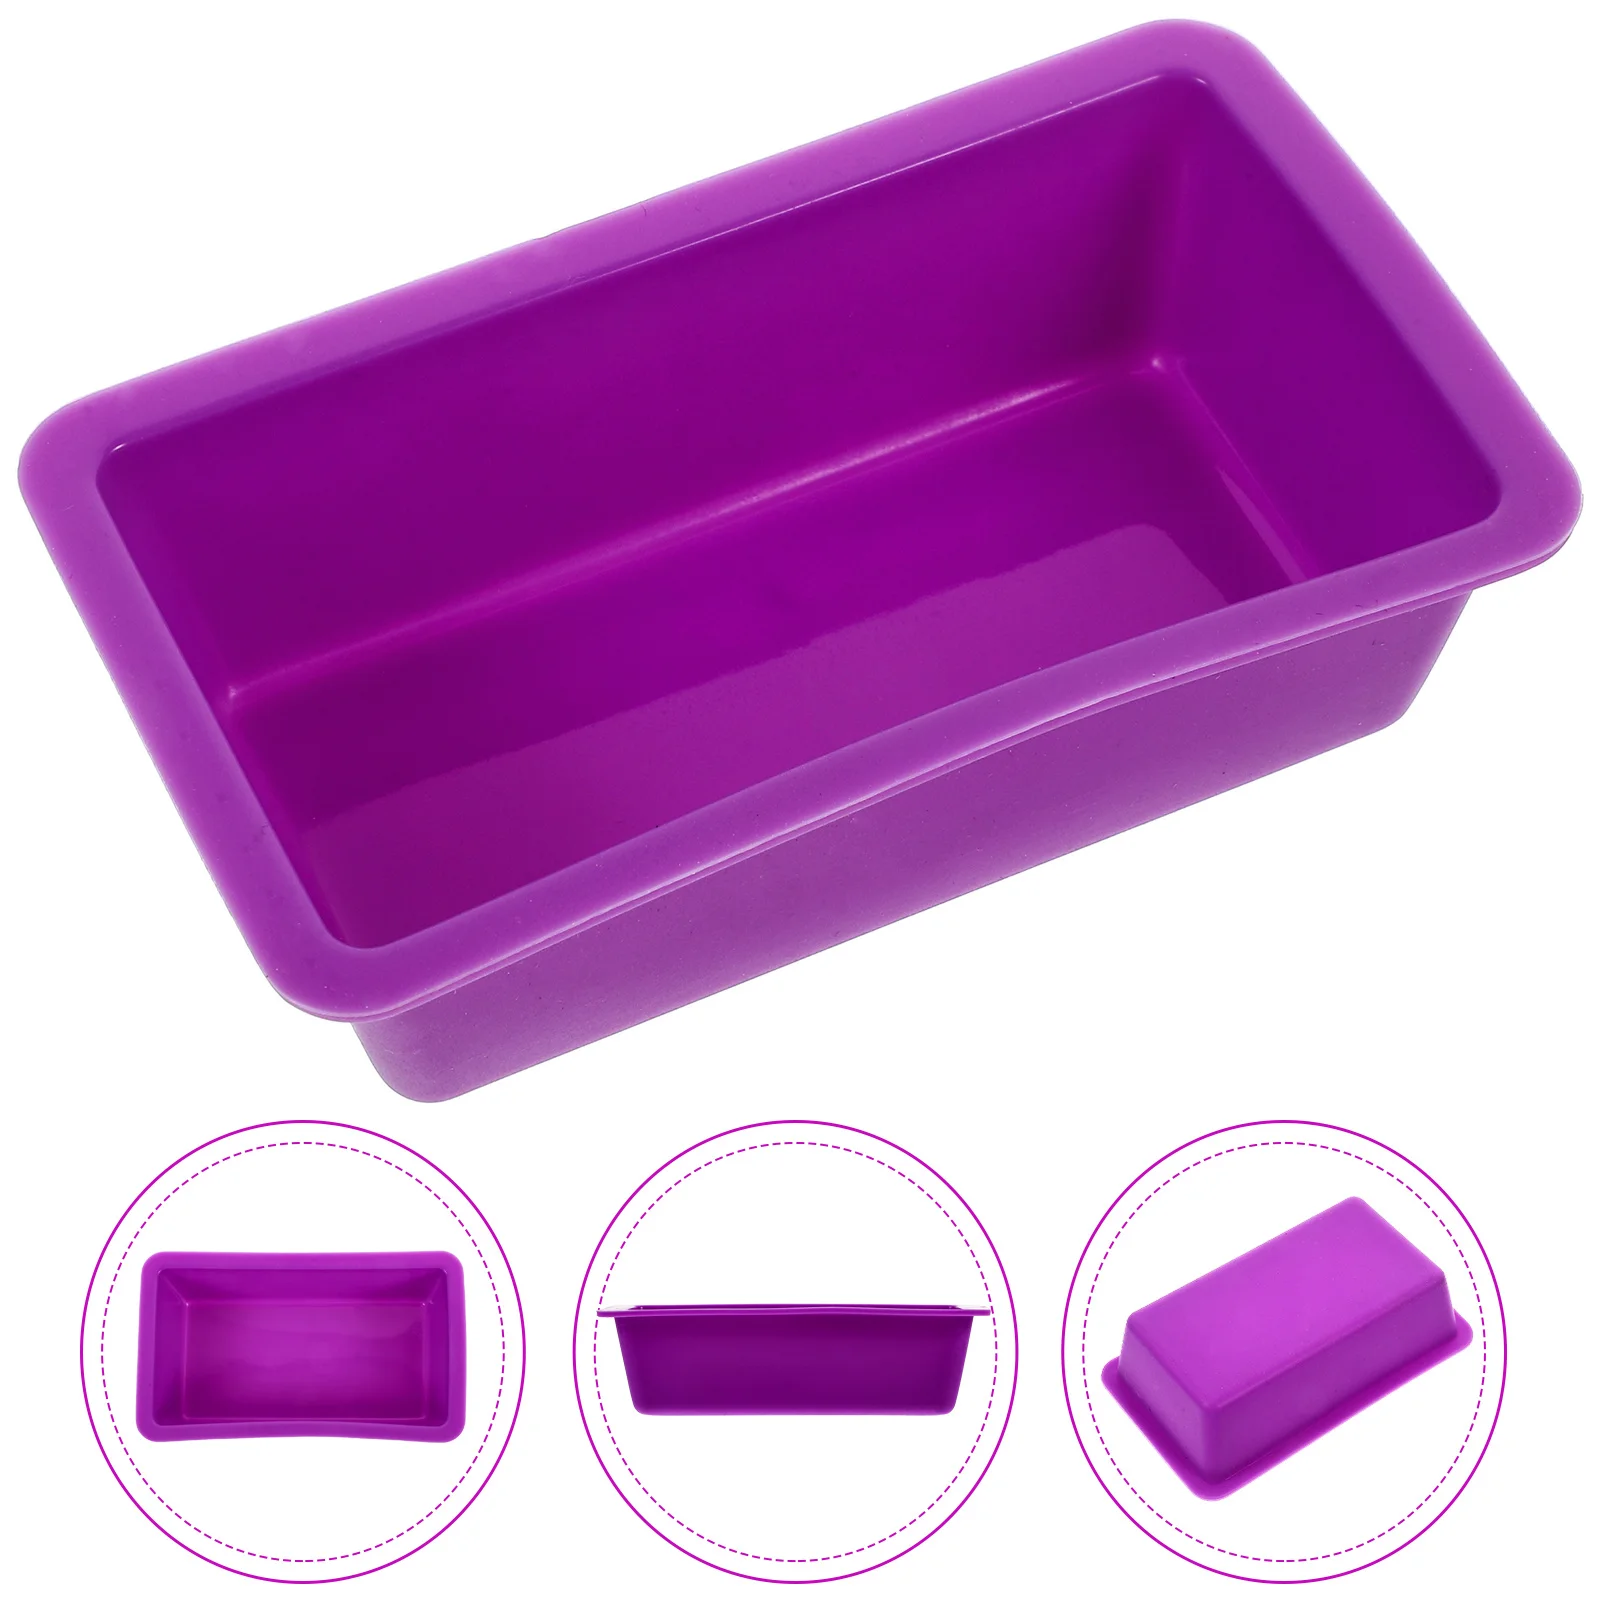 

Silicone Bread Pan Baking Loaf Mold Molds Cake Toast Mould Pans Nonstick Bakeware Moulds Tin Square Mini Box Meatloaf Banana